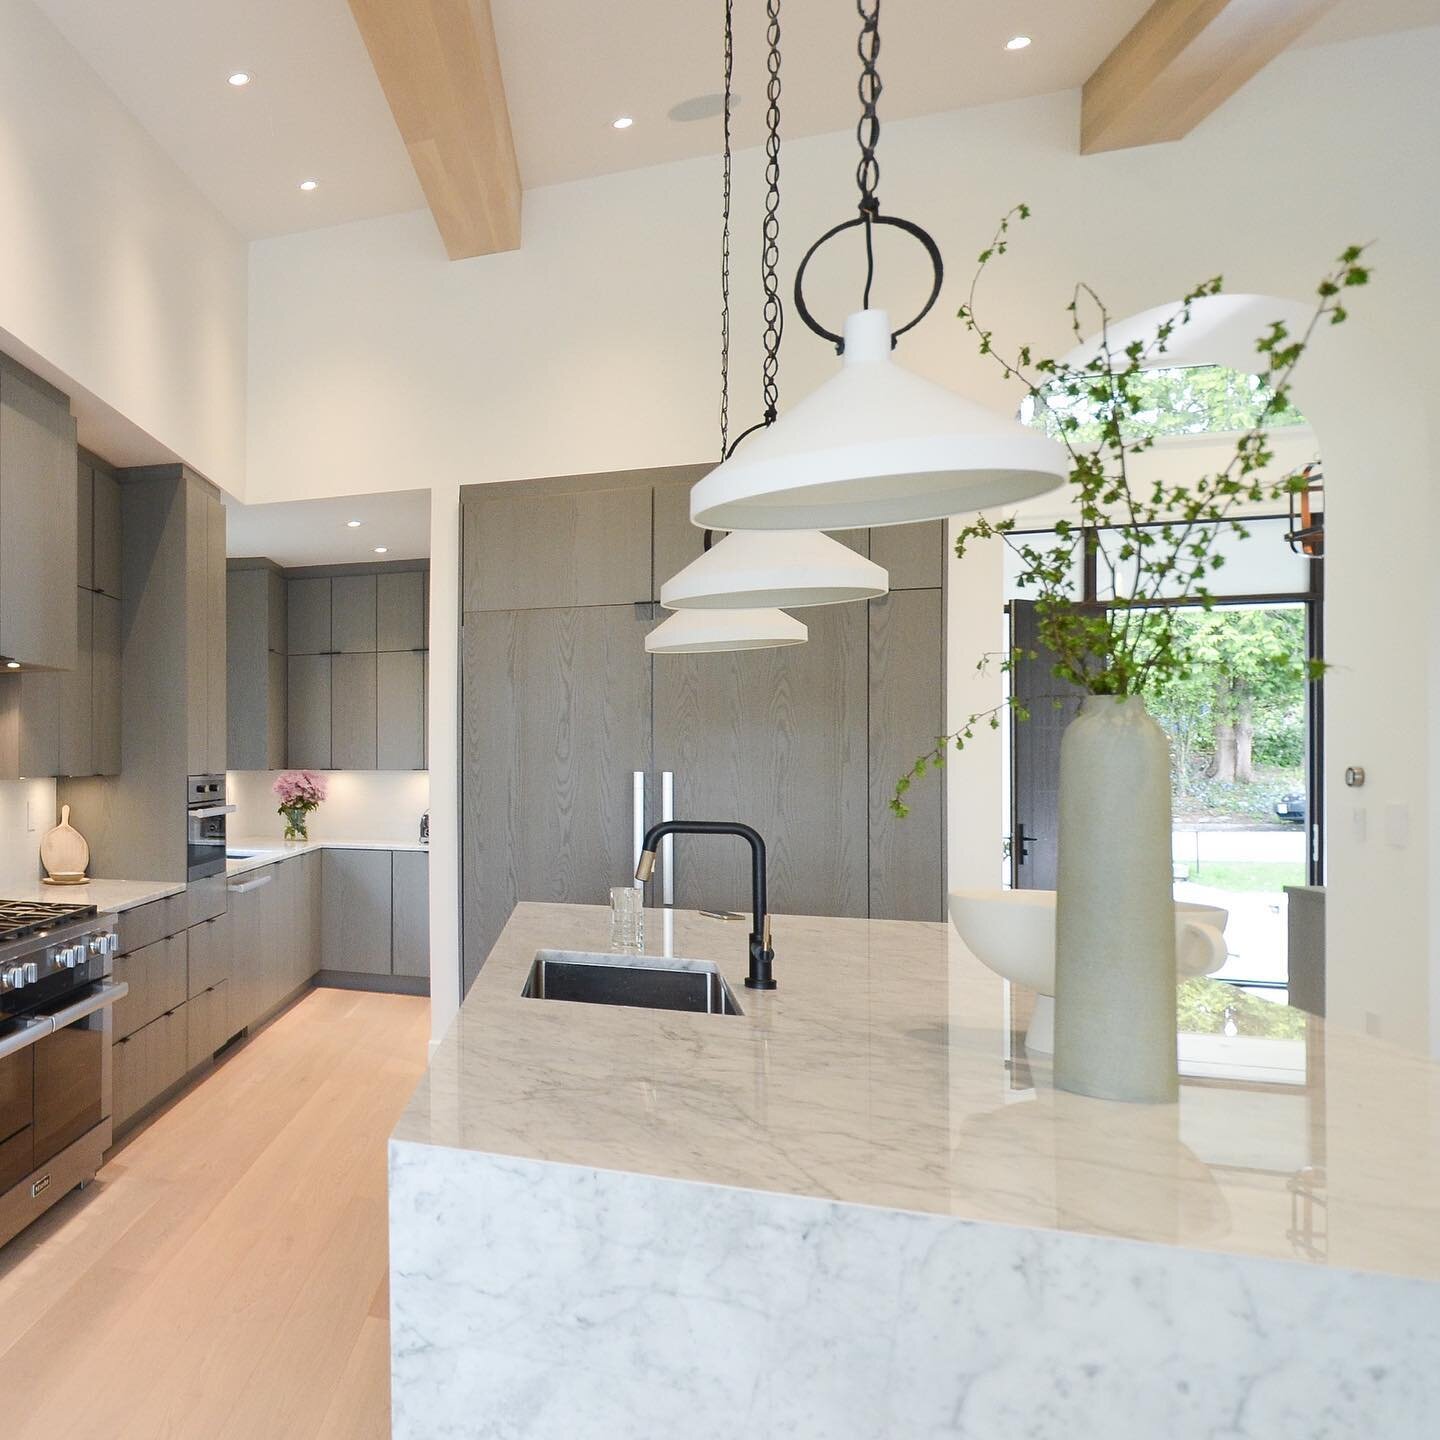 1 of 2 | A modern kitchen with a traditional twist. By mixing these two styles, this minimally traditional home creates a relaxed and inviting feel and makes a statement. 
.
We still can't get over these beams! 😍
.
.
.
⠀⠀⠀⠀⠀⠀⠀⠀⠀
#kitchen #customnewb